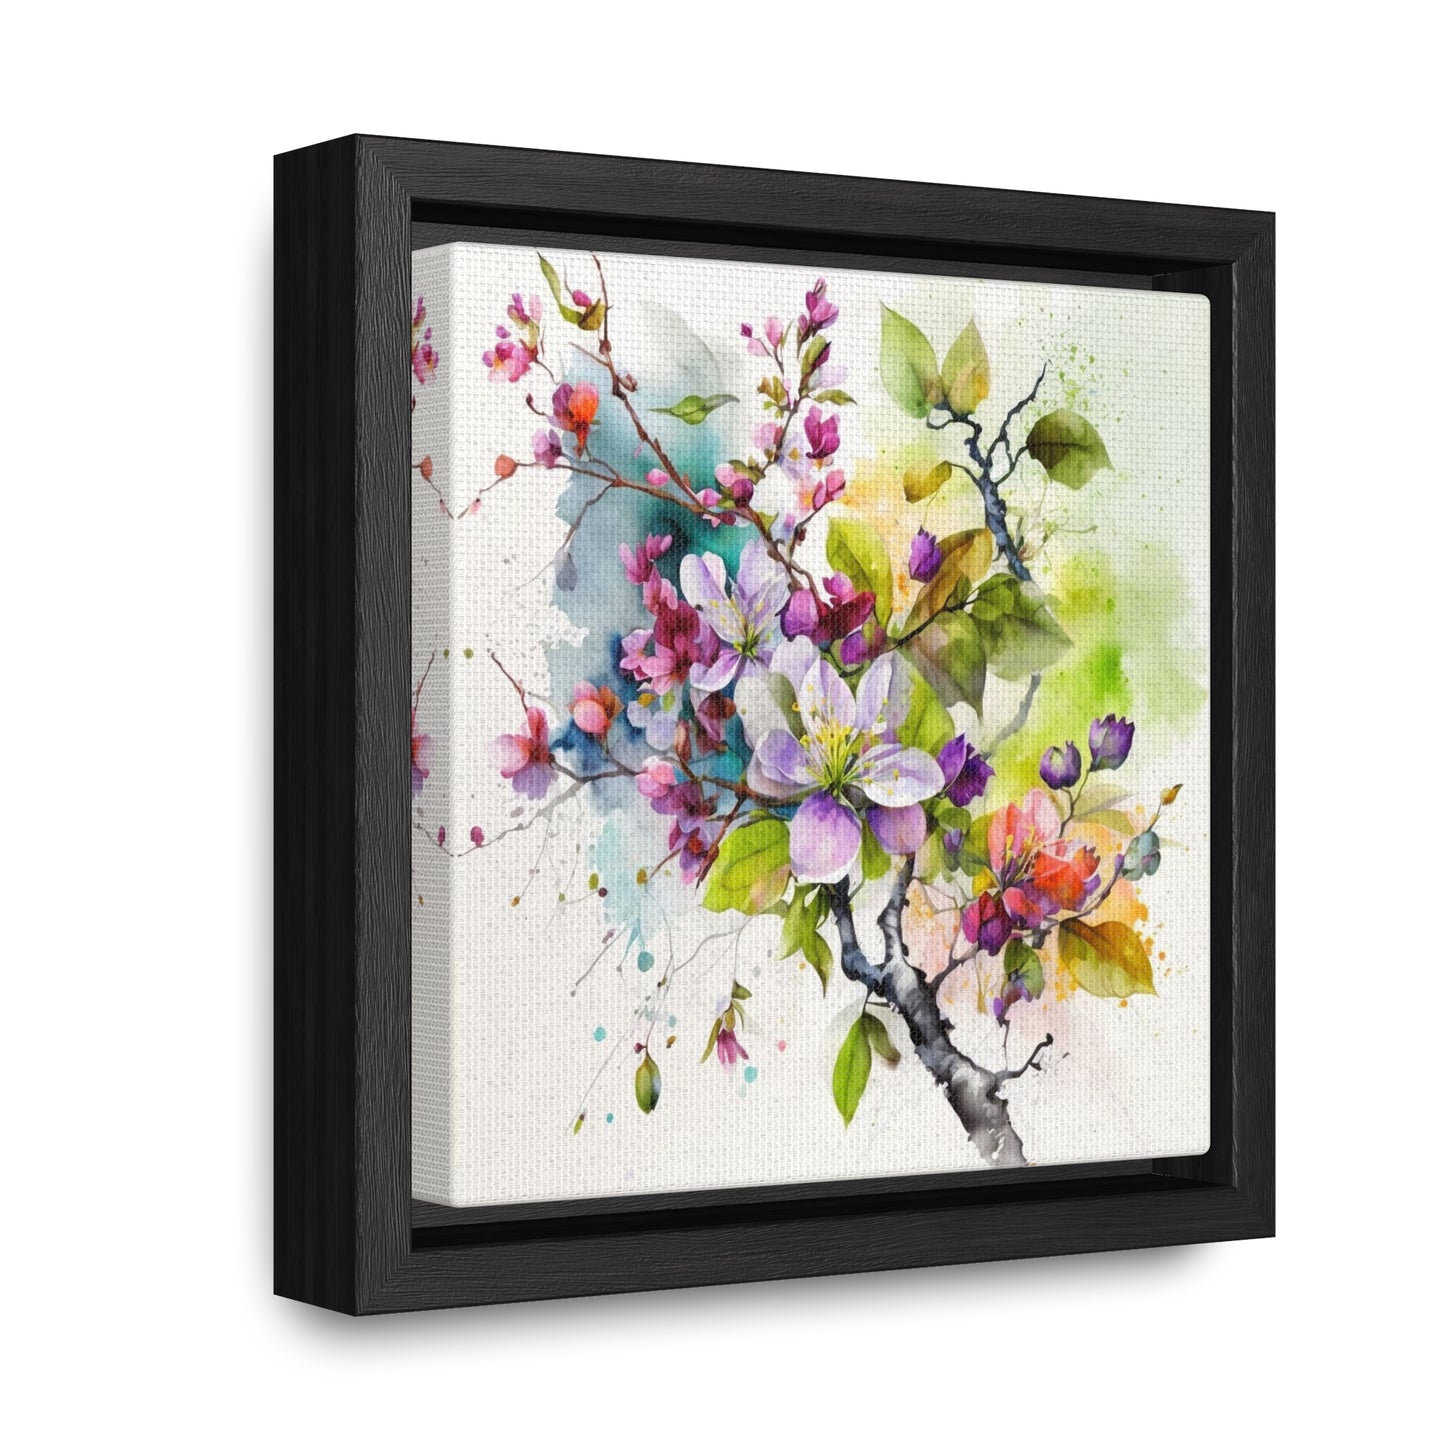 Gallery Canvas Wraps, Square Frame Mother Nature Bright Spring Colors Realistic Watercolor 4